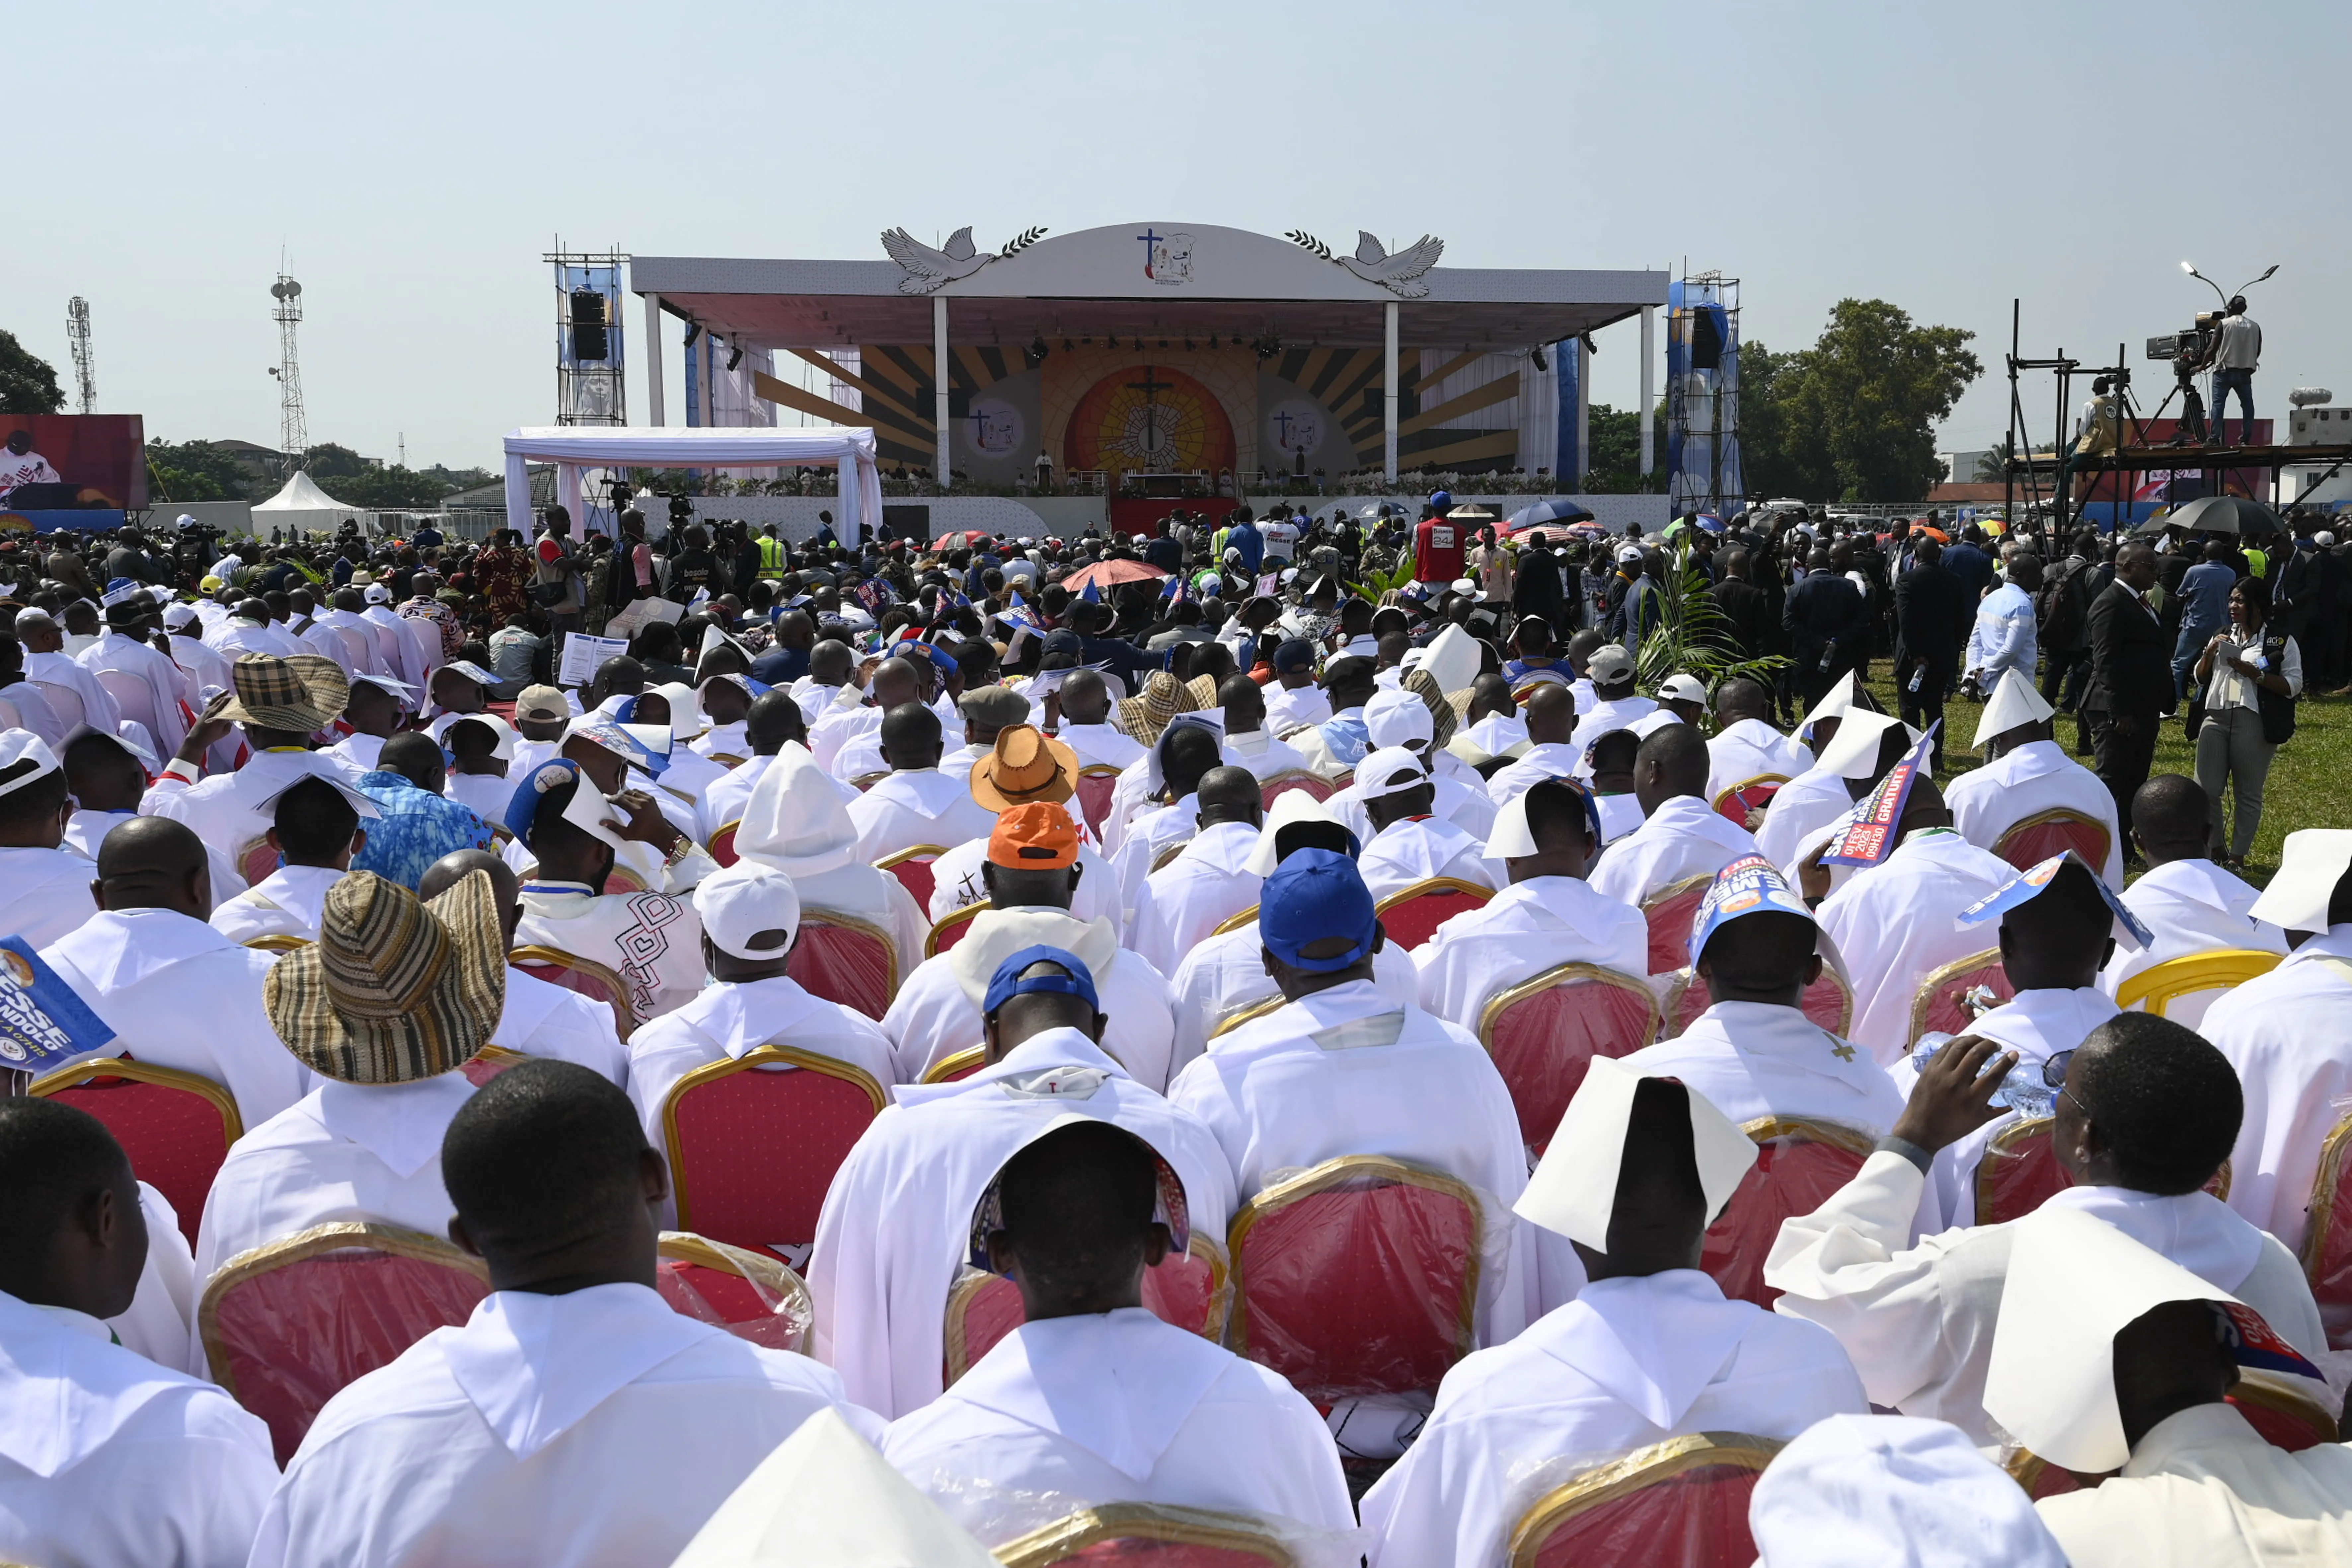 Pope Francis celebrated Mass with around 1 million people on February 1, 2023 in Kinshasa, Democratic Republic of the Congo.  Vatican Media